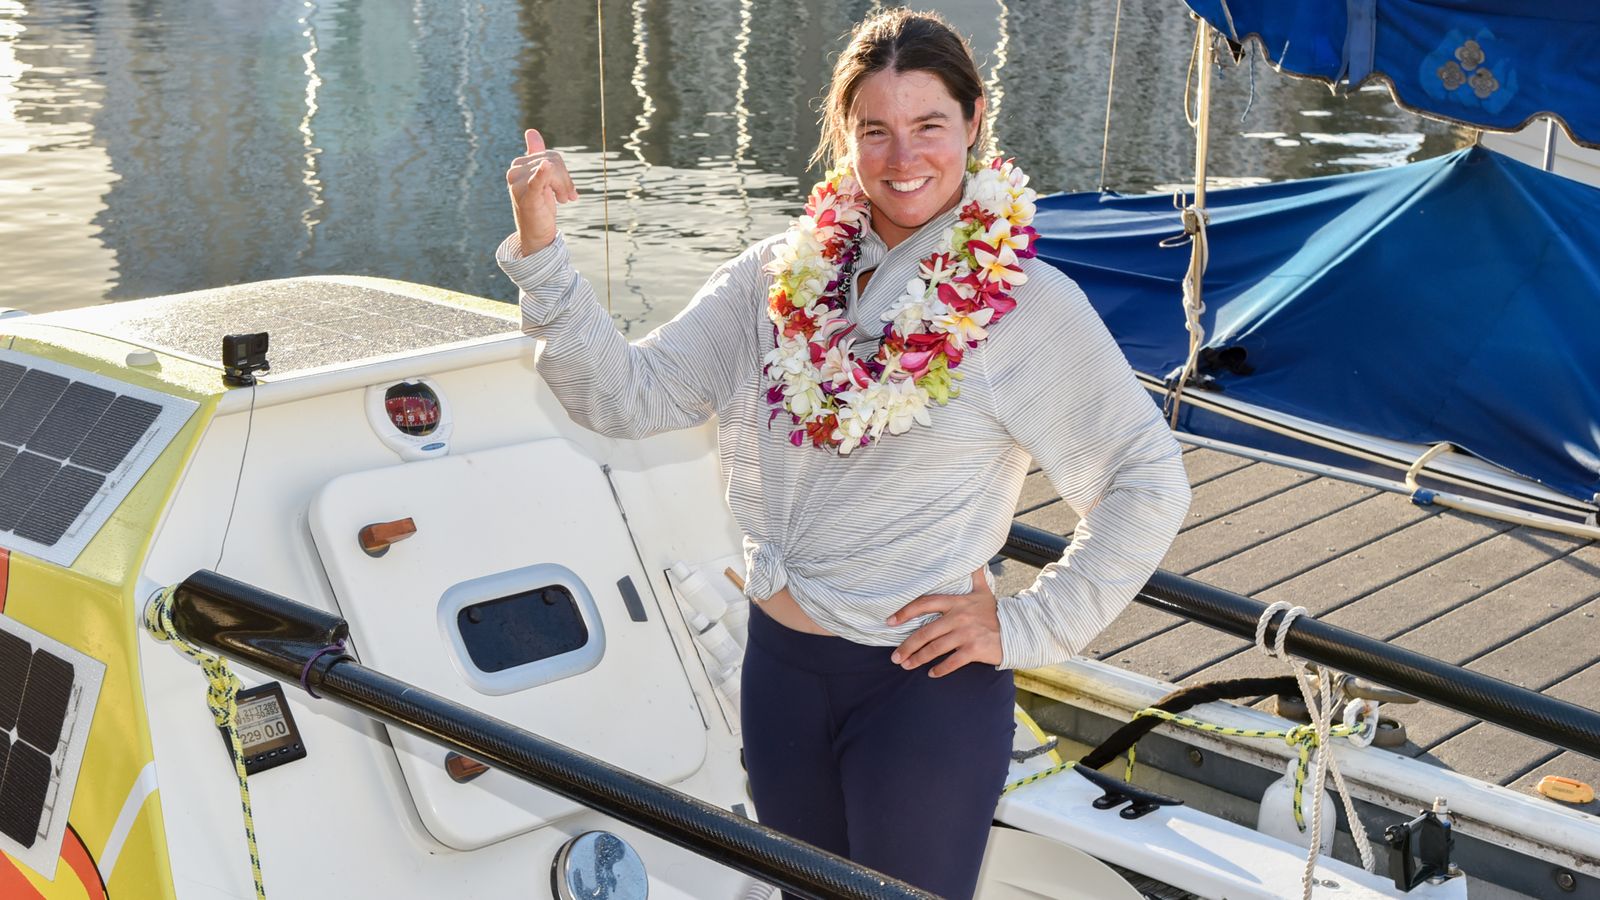 british-woman-lia-ditton-sets-new-world-record-for-rowing-from-us-mainland-to-hawaii-uk-news-sky-news